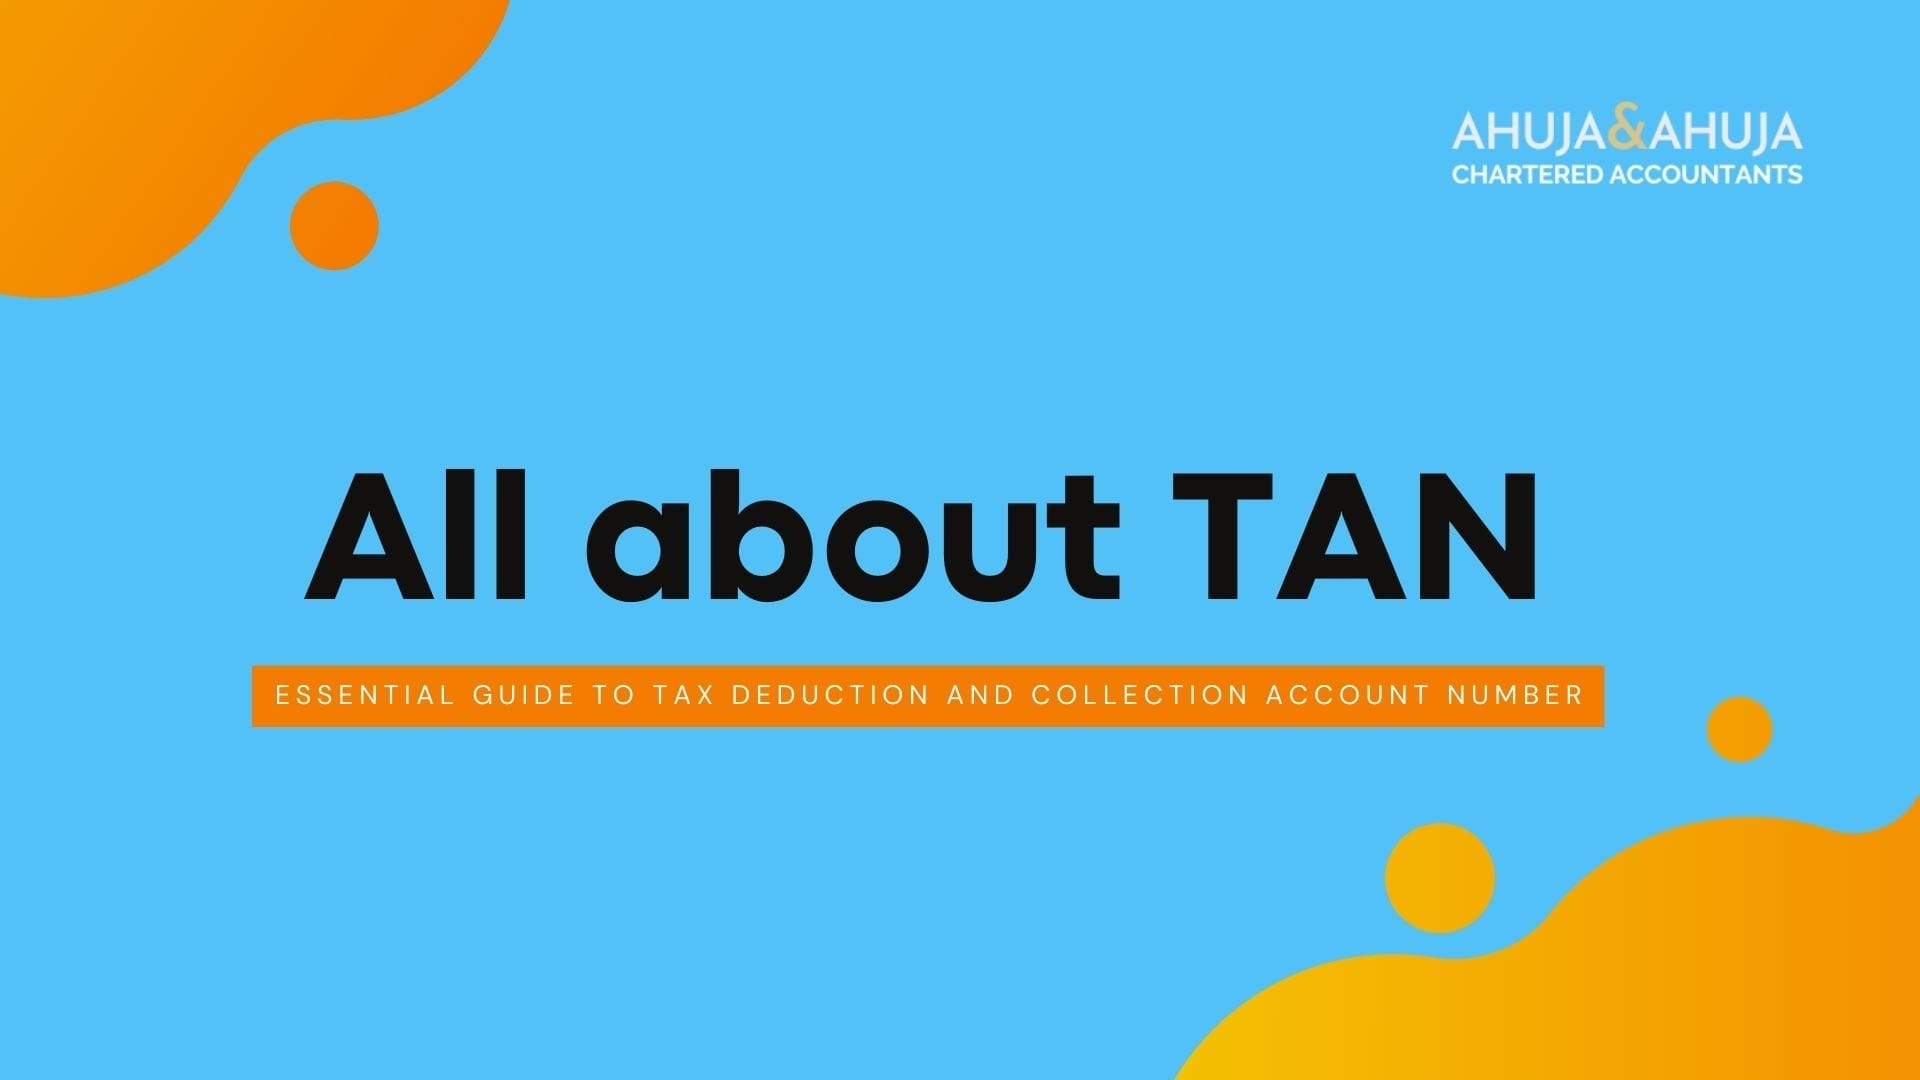 All about TAN